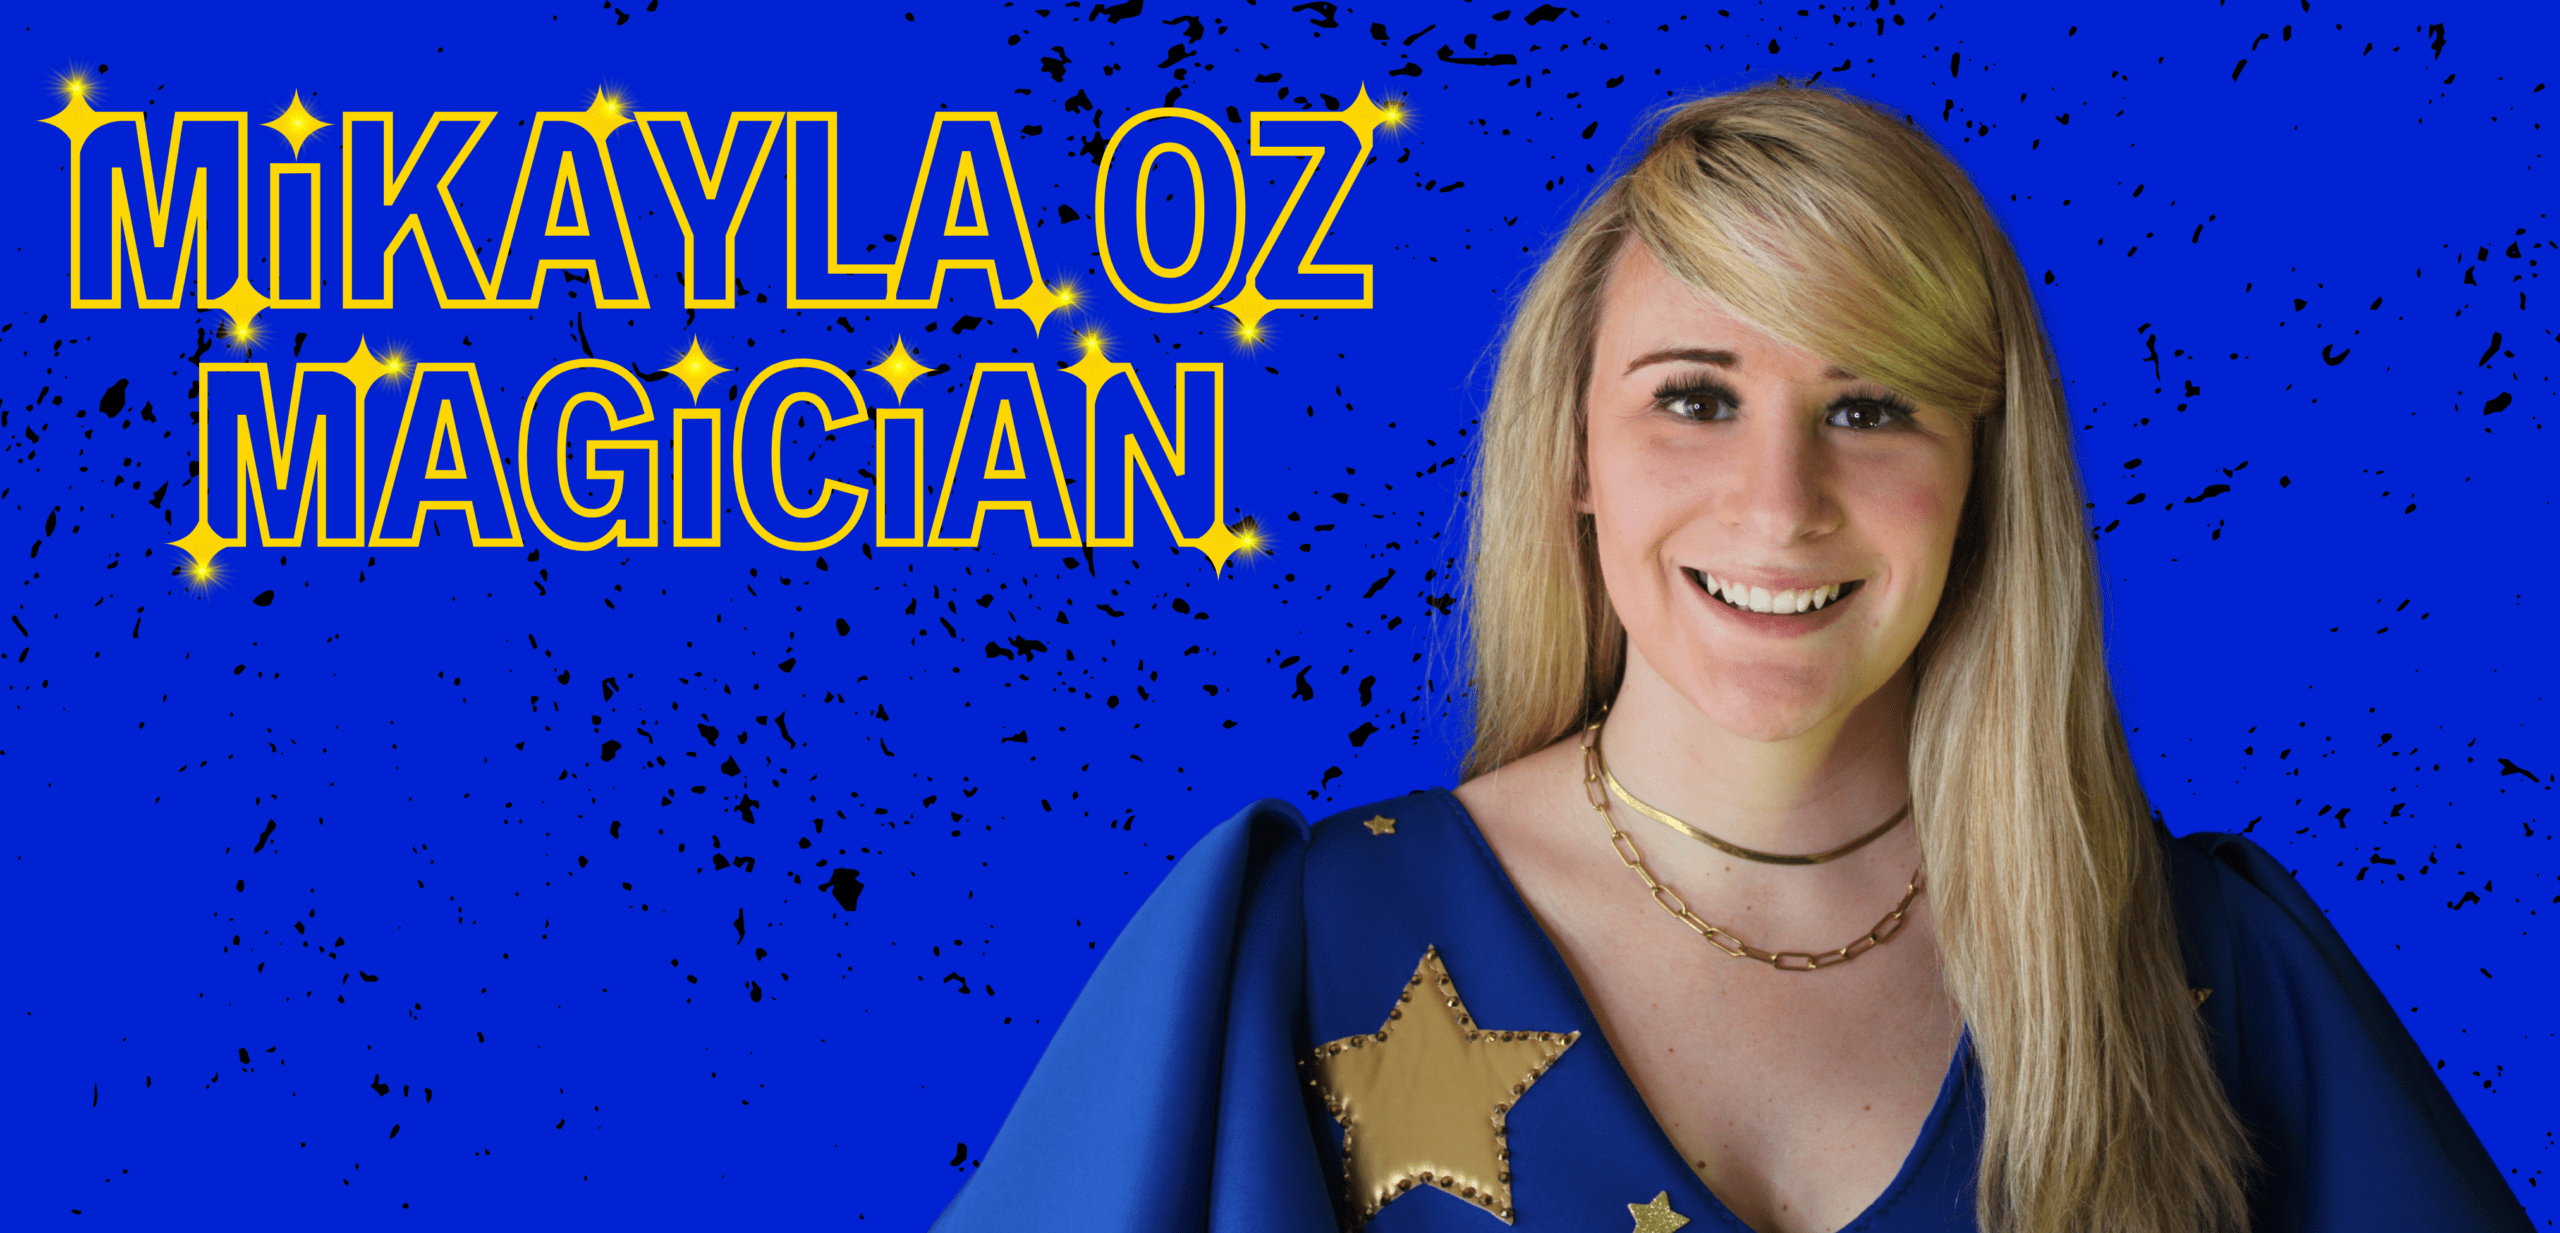 The words "Magician Mikayla Oz" in yellow type on a blue background, next to a photo of a smiling blond woman wearing a blue top with yellow stars